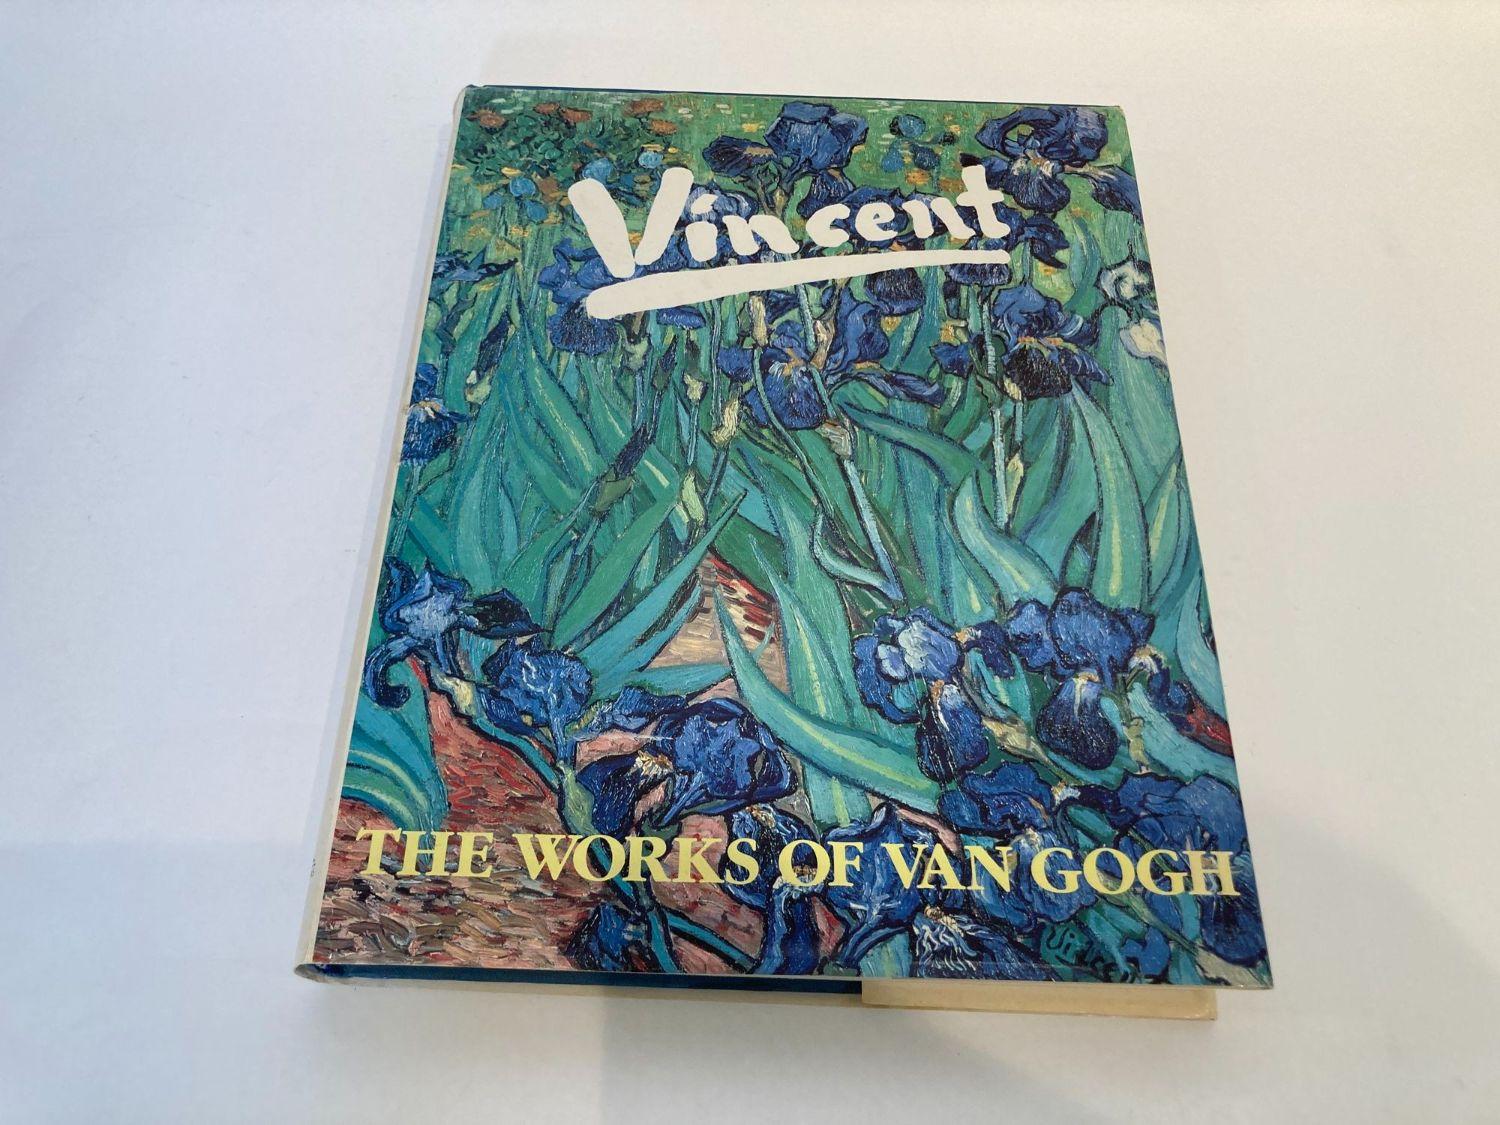 Vincent The Works of Vincent Van Gogh Large Hardcover Art Book.
New York: Gallery Books, 1991. First Edition; First Printing. Hardcover.
Considered a founding father of modern painting, Vincent van Gogh is also one of the most famed tragic figures